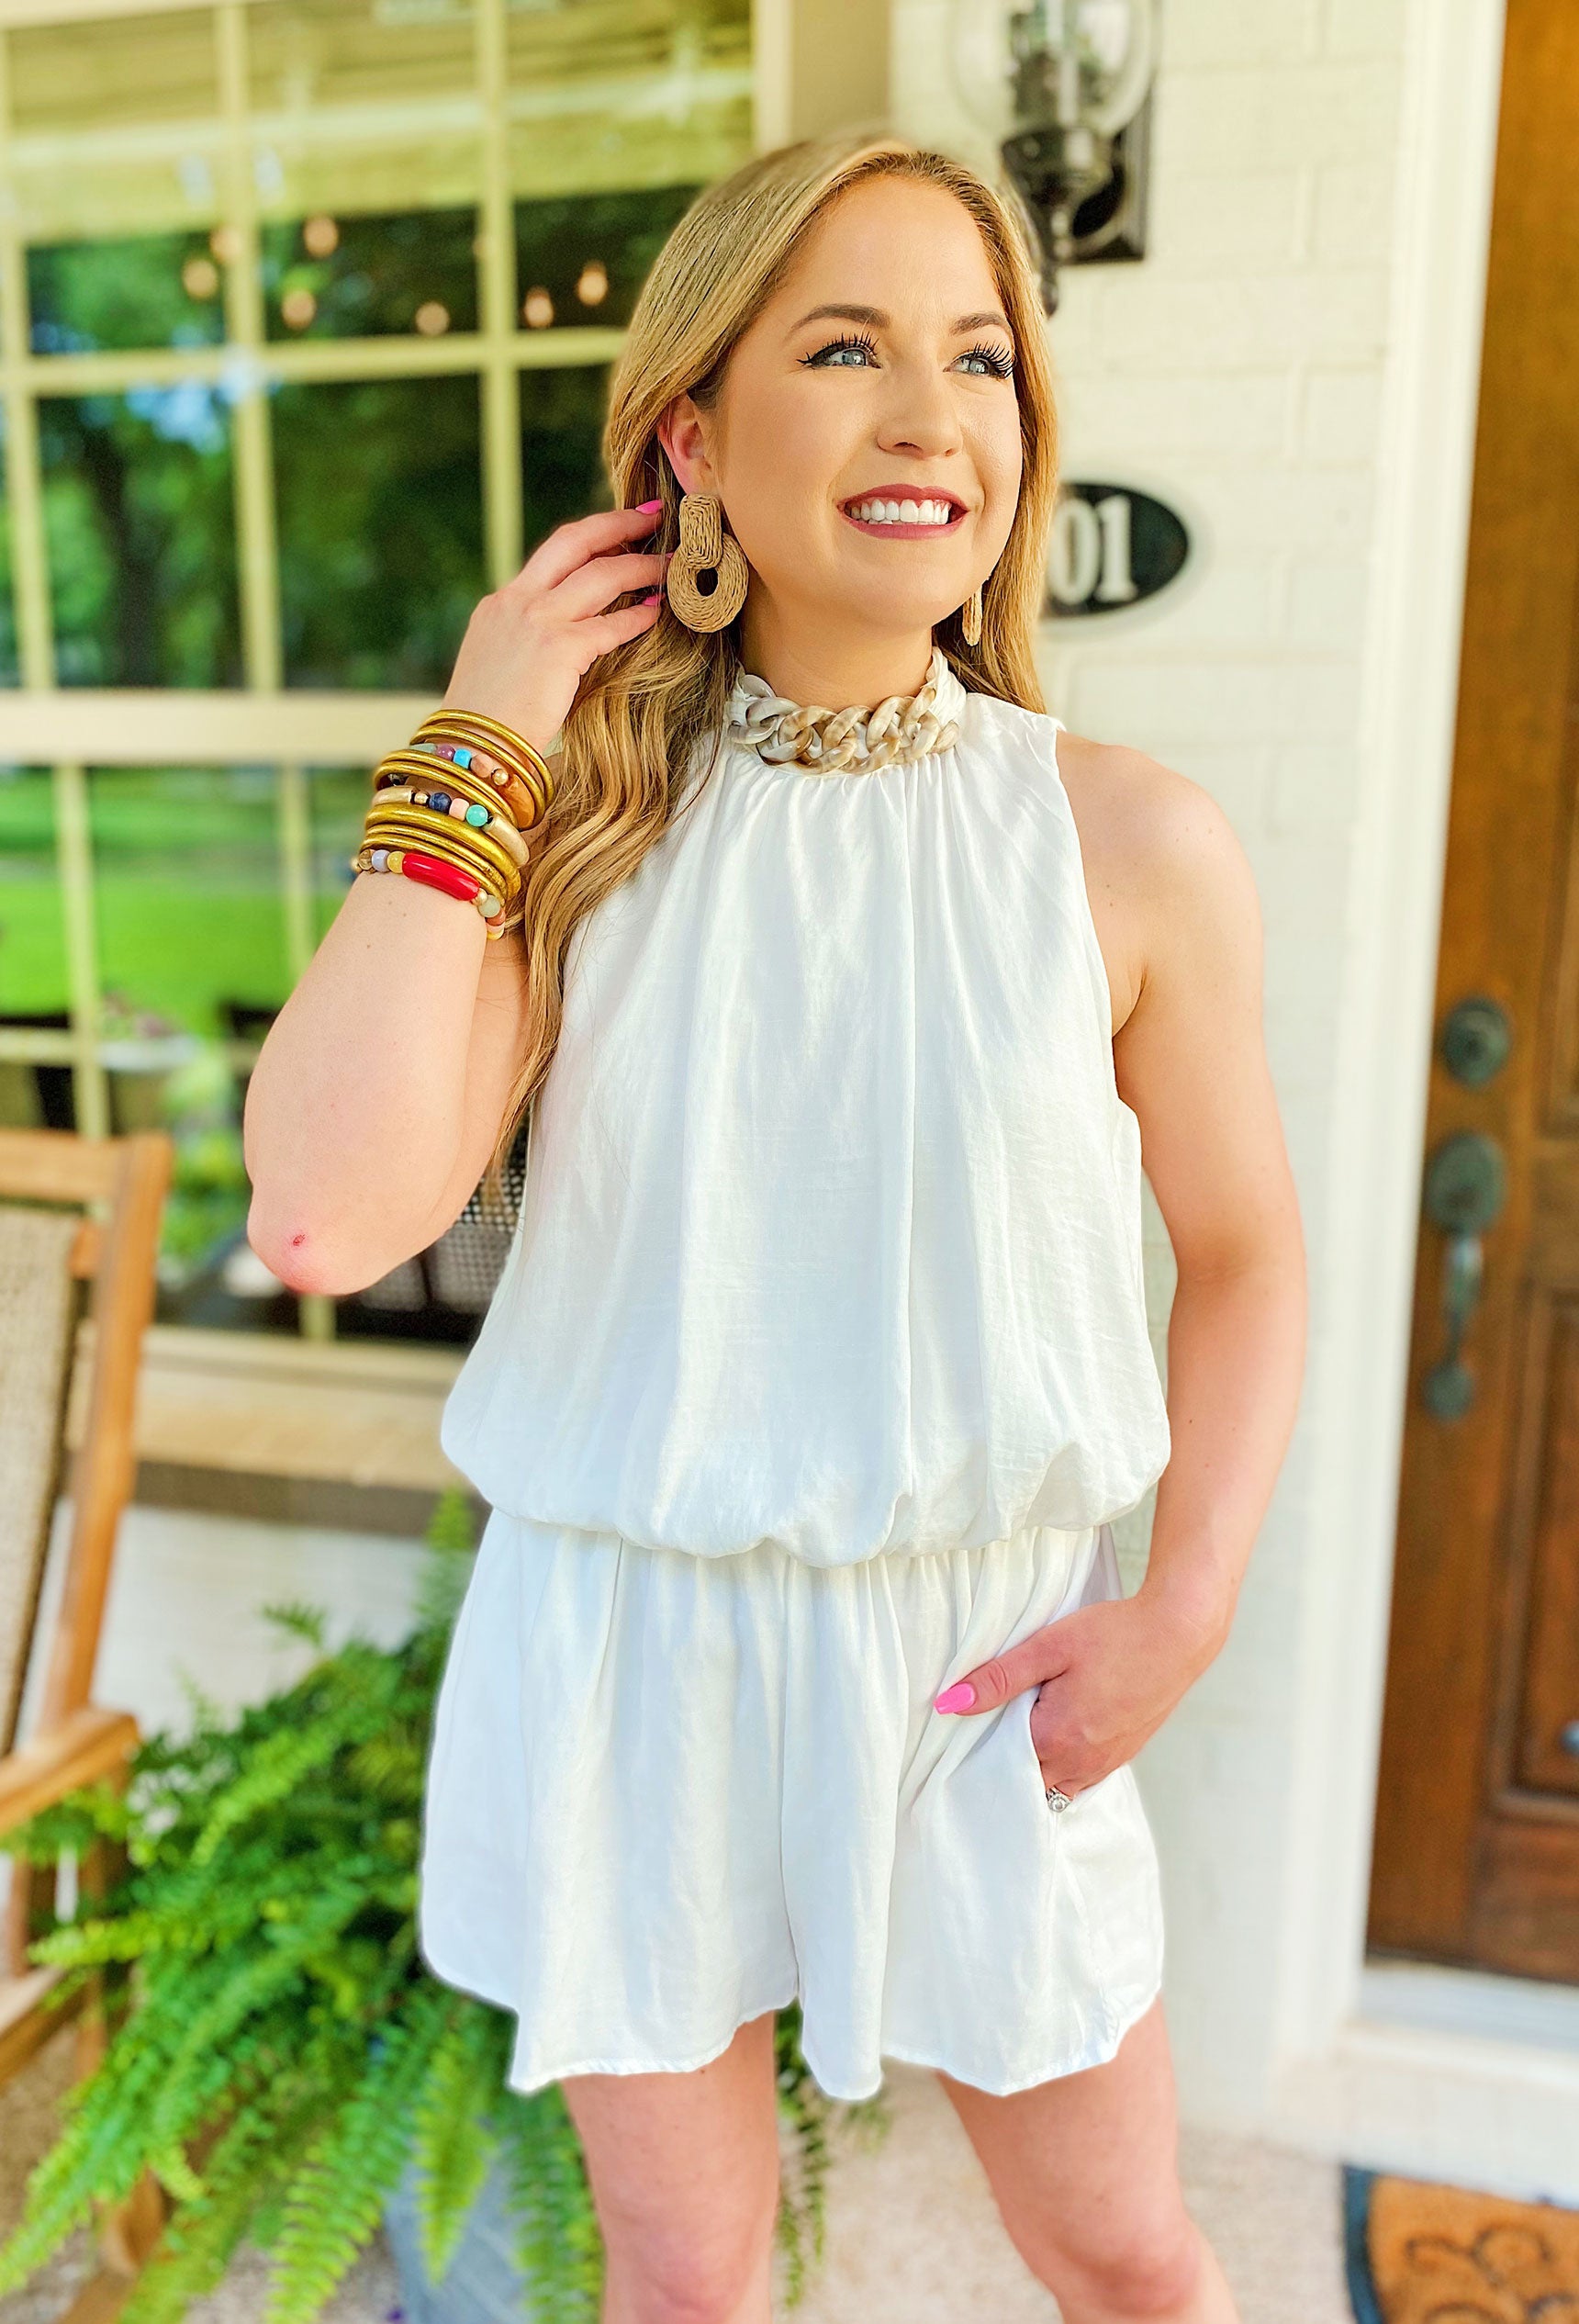 In Your Dreams Romper, white halter top and an alluring open back, White romper with a neutral acrylic chain detail across the front and an open back